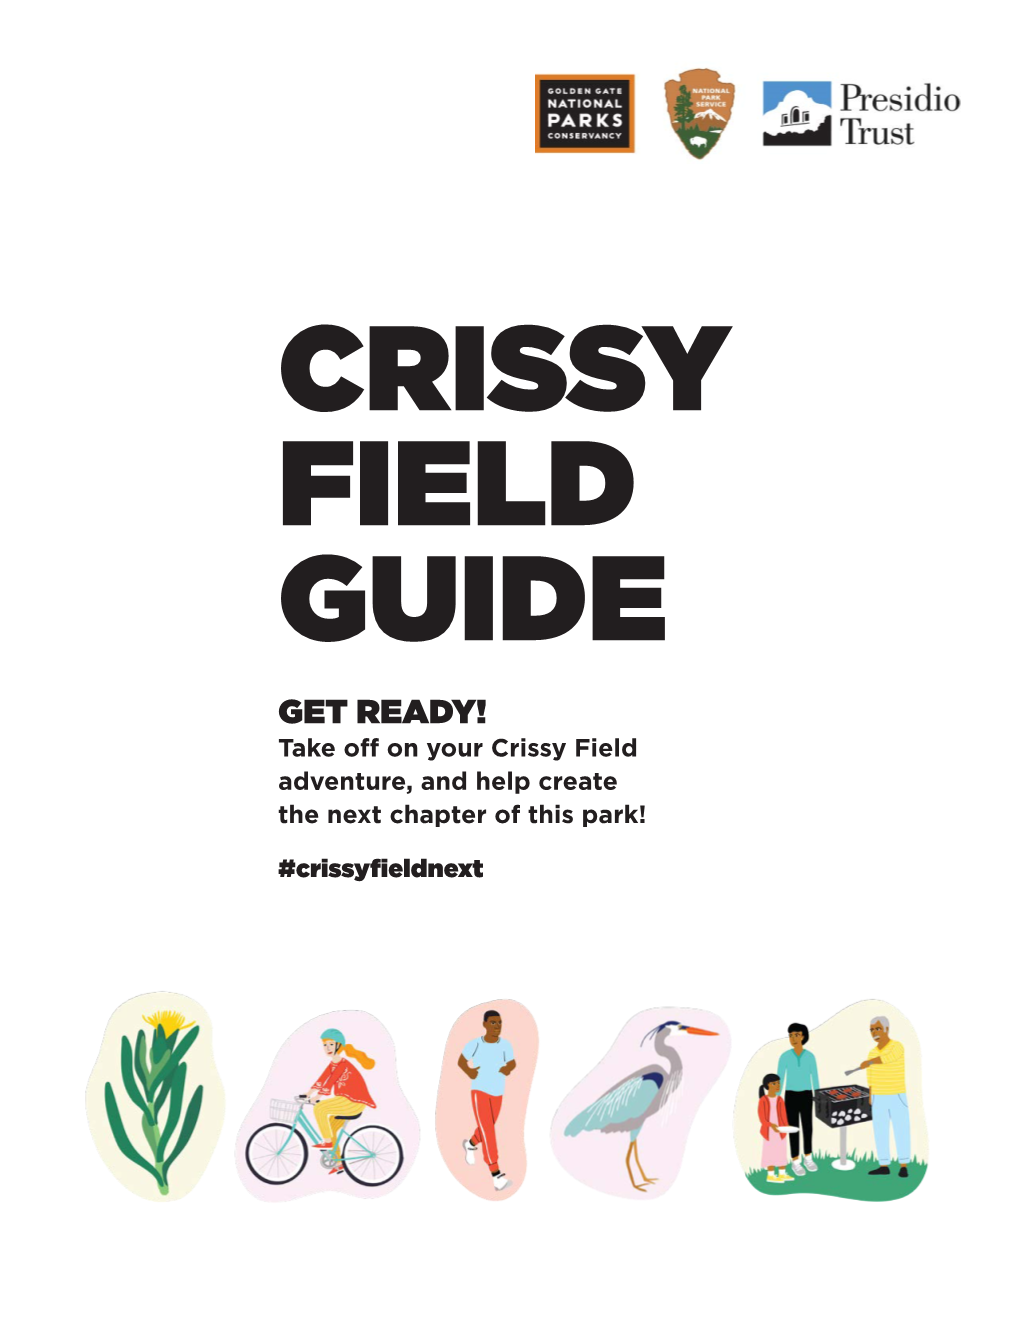 CRISSY FIELD GUIDE GET READY! Take Off on Your Crissy Field Adventure, and Help Create the Next Chapter of This Park!